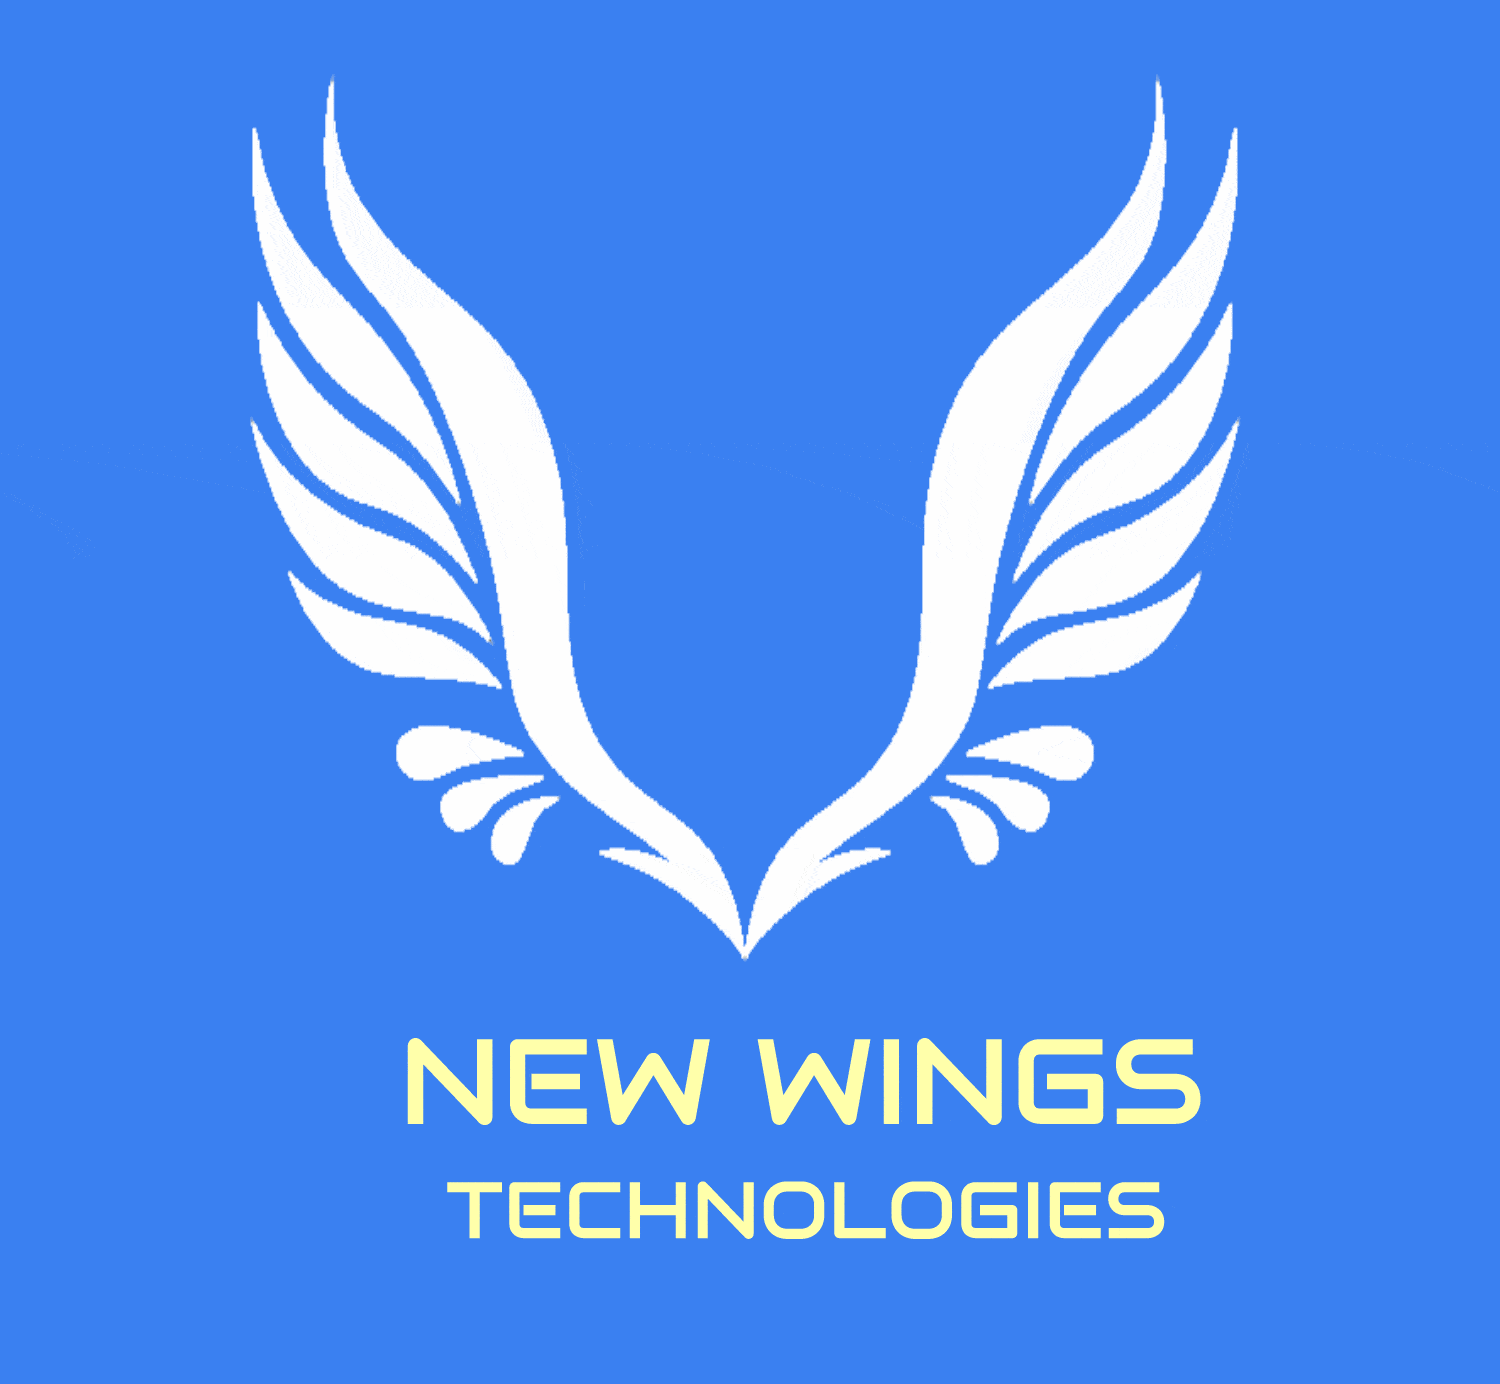 Globe with Wings Logo - skilled security researchers across the globe – New Wings Technologies